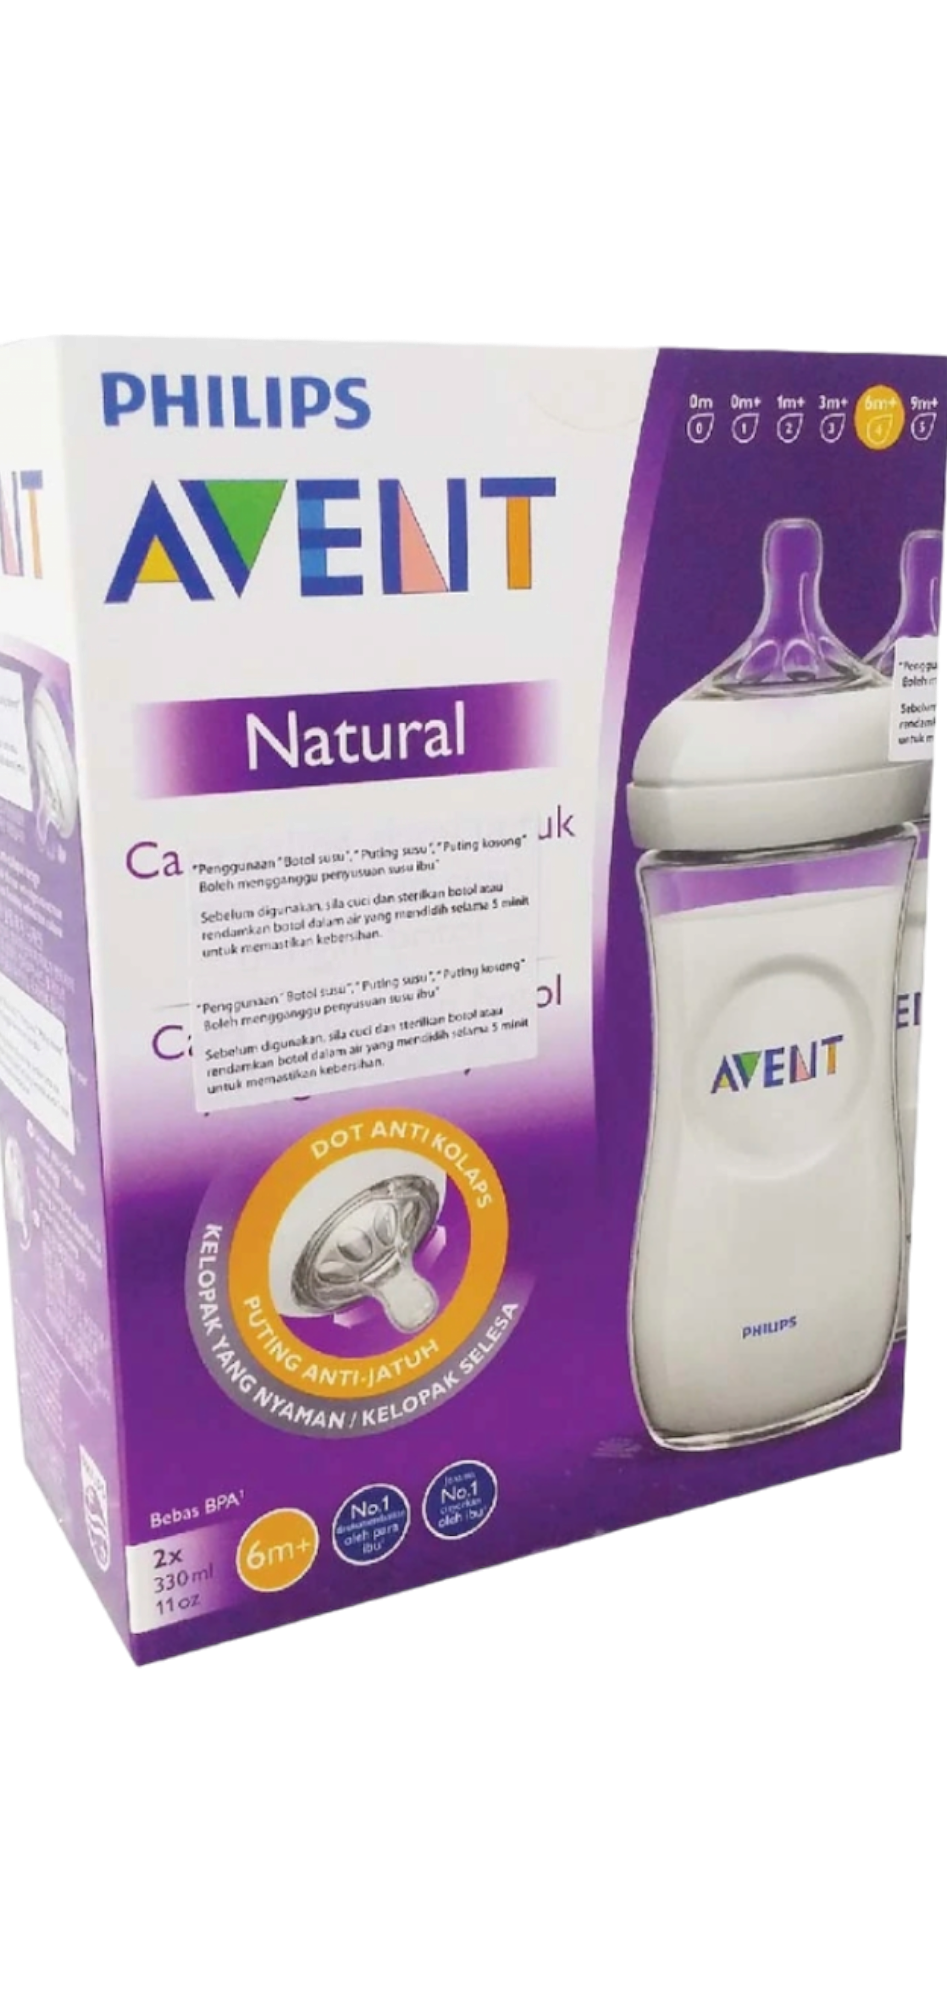 PHILIPS AVENT NATURAL 330ML BOTTLE (TWIN PACK)